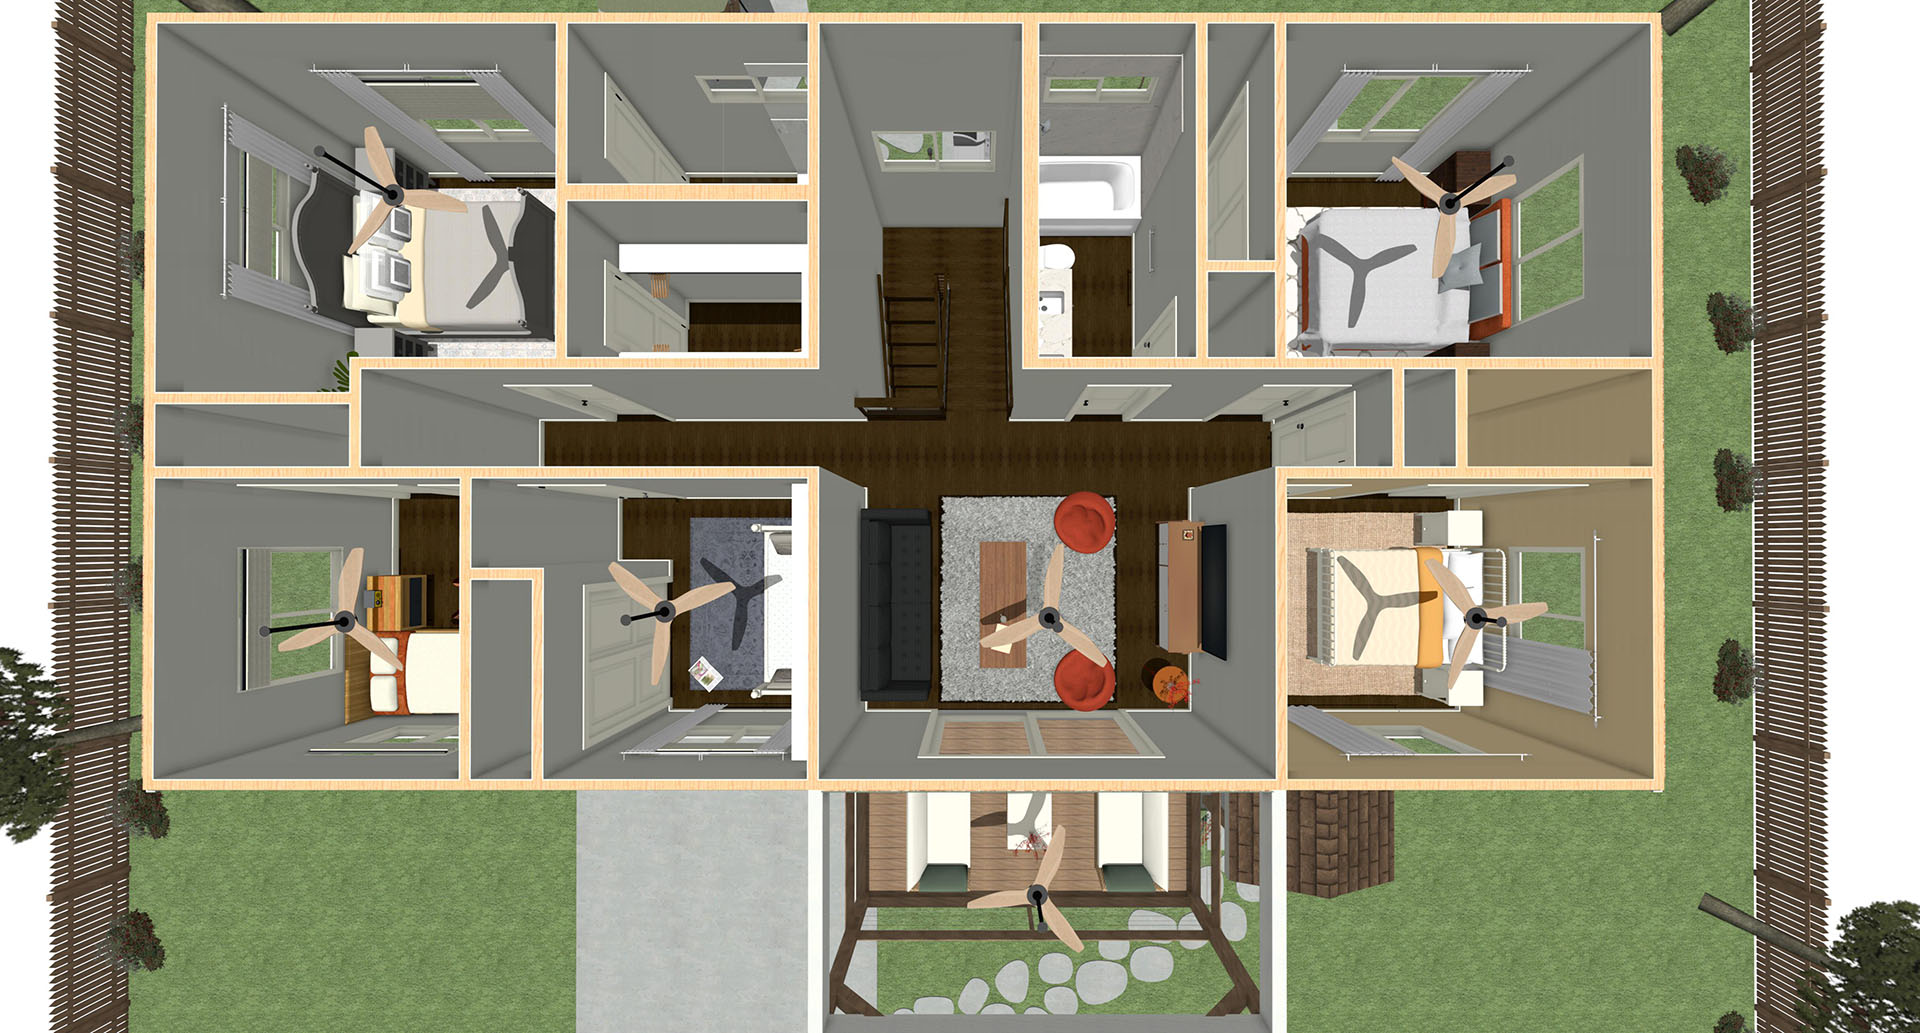 Aerial view of a house's downstairs area that has eight rooms